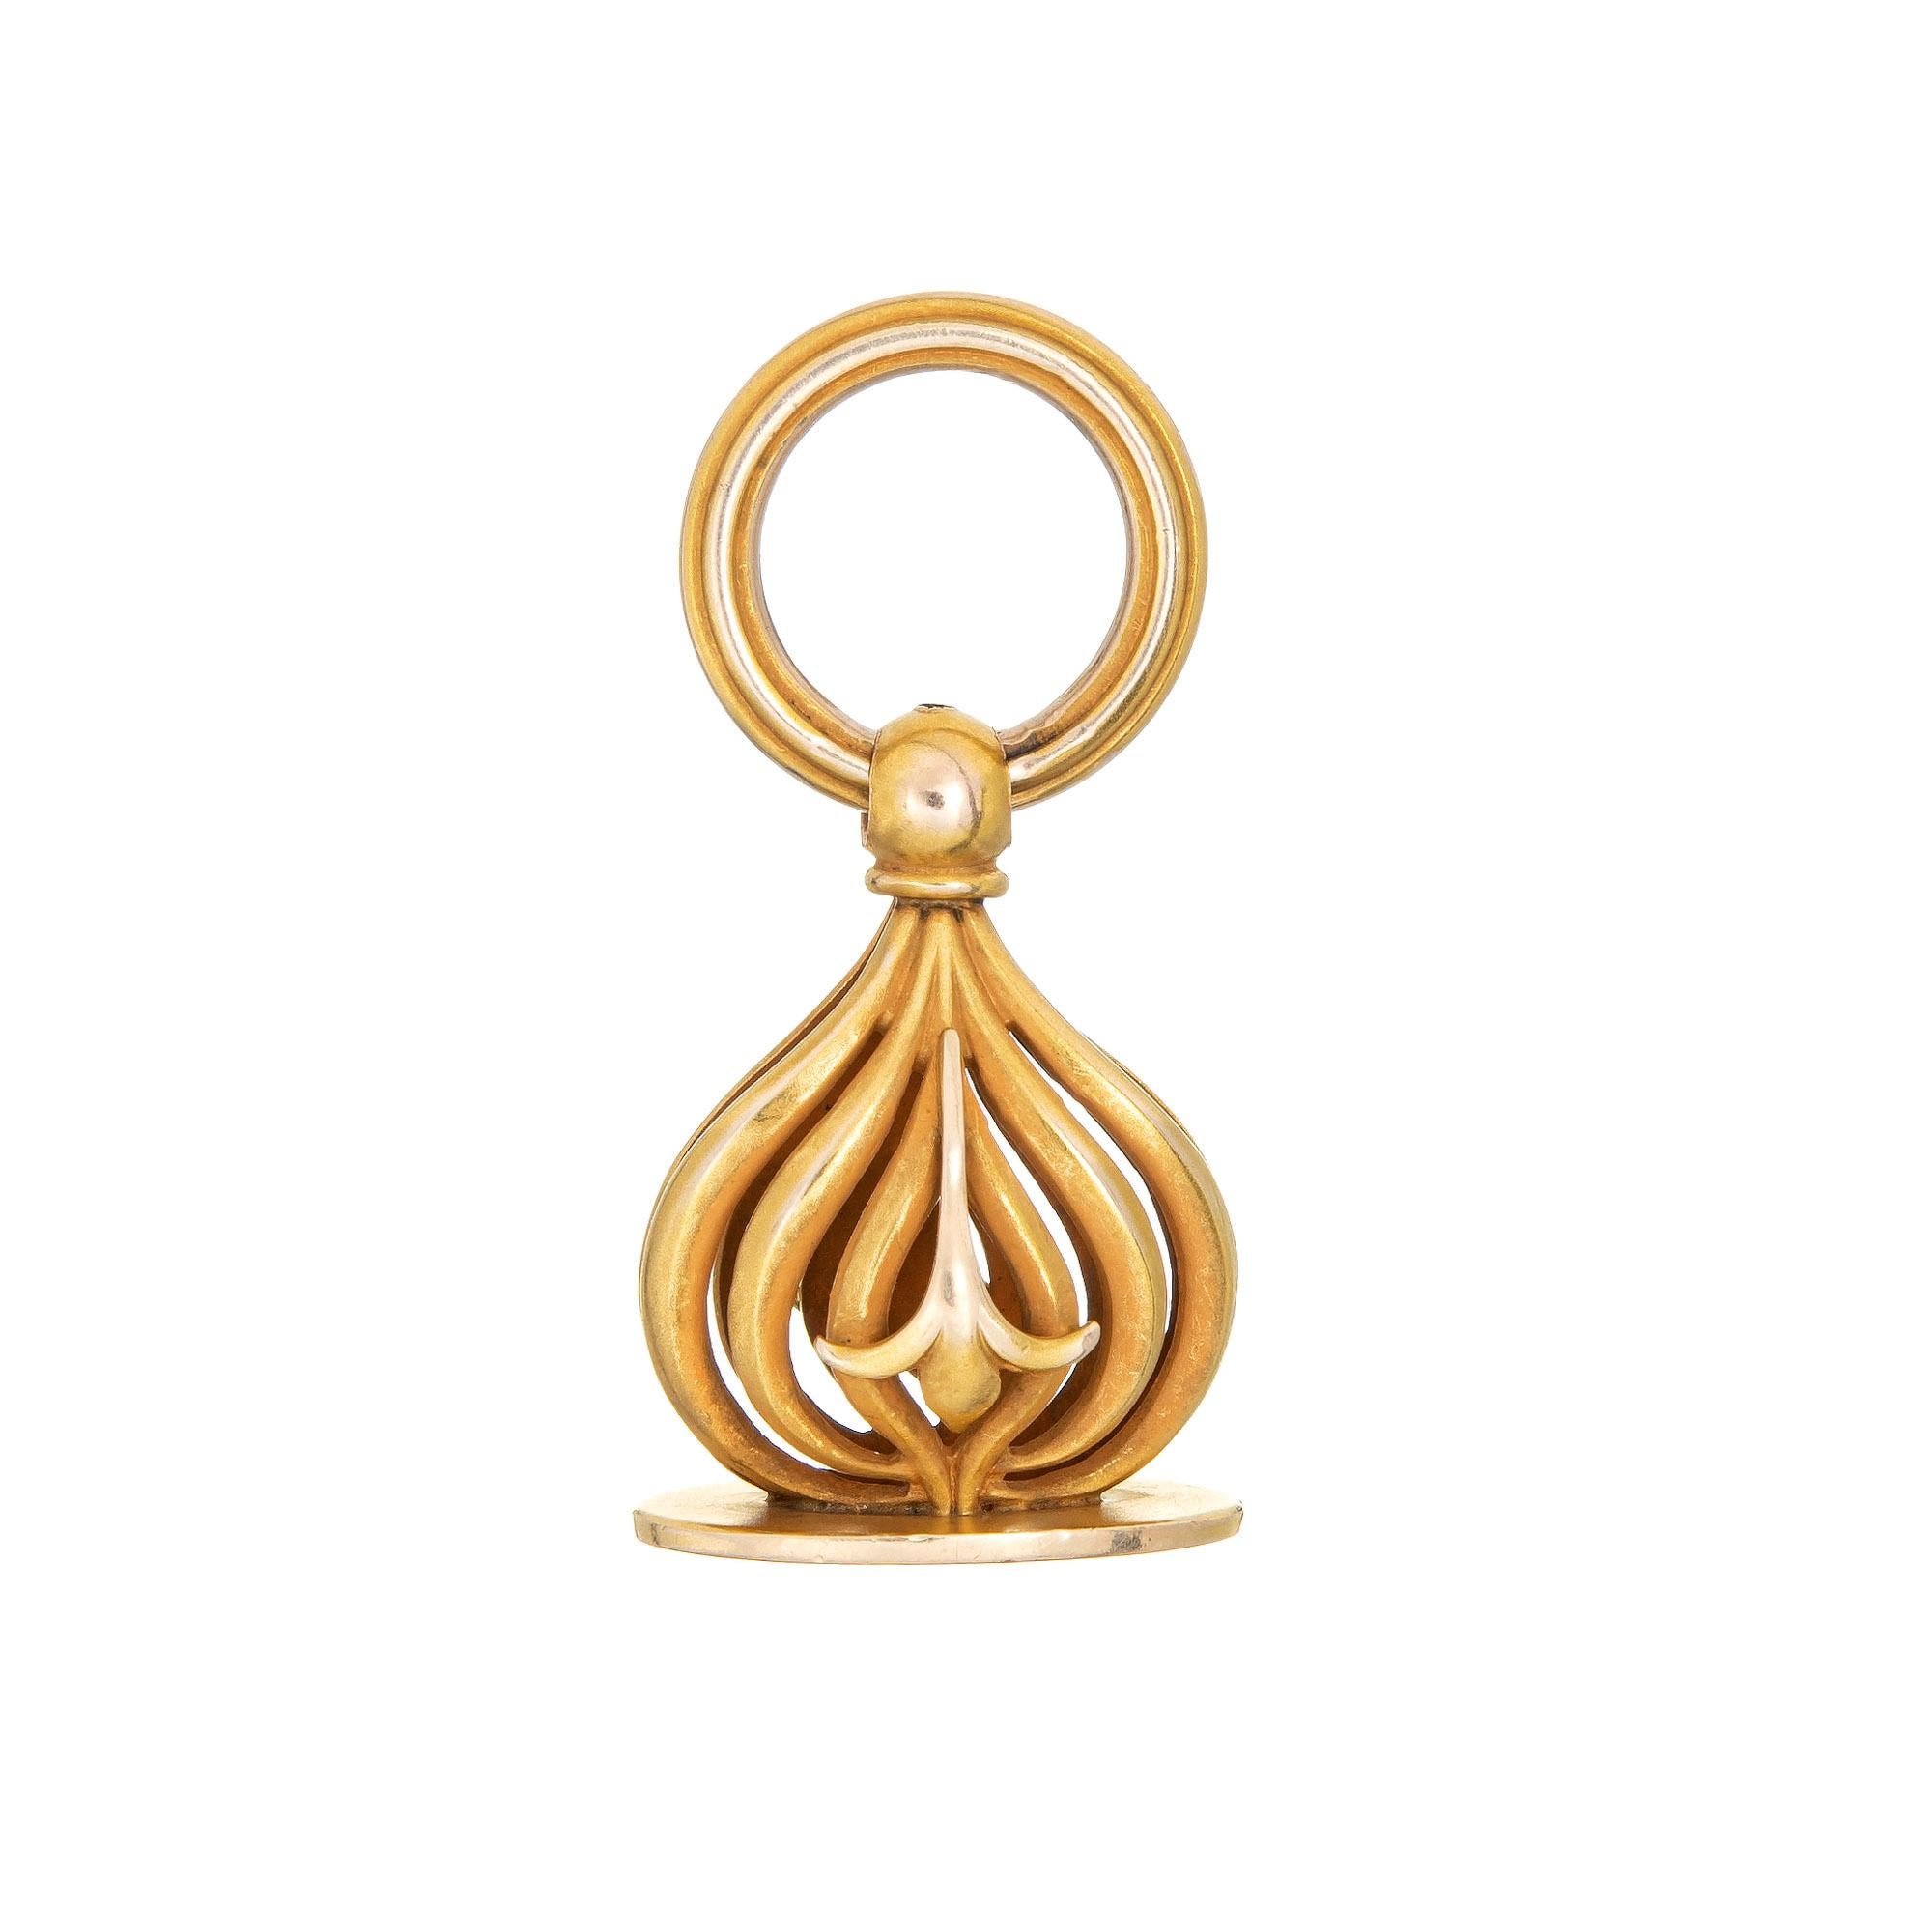 Lovely antique Victorian fob (circa 1880s to 1900s) crafted in 14 karat yellow gold. 

The beautifully detailed antique fob was originally worn by a gentleman with a pocket watch, a stylish addition to any outfit. Today watch fobs are great worn as